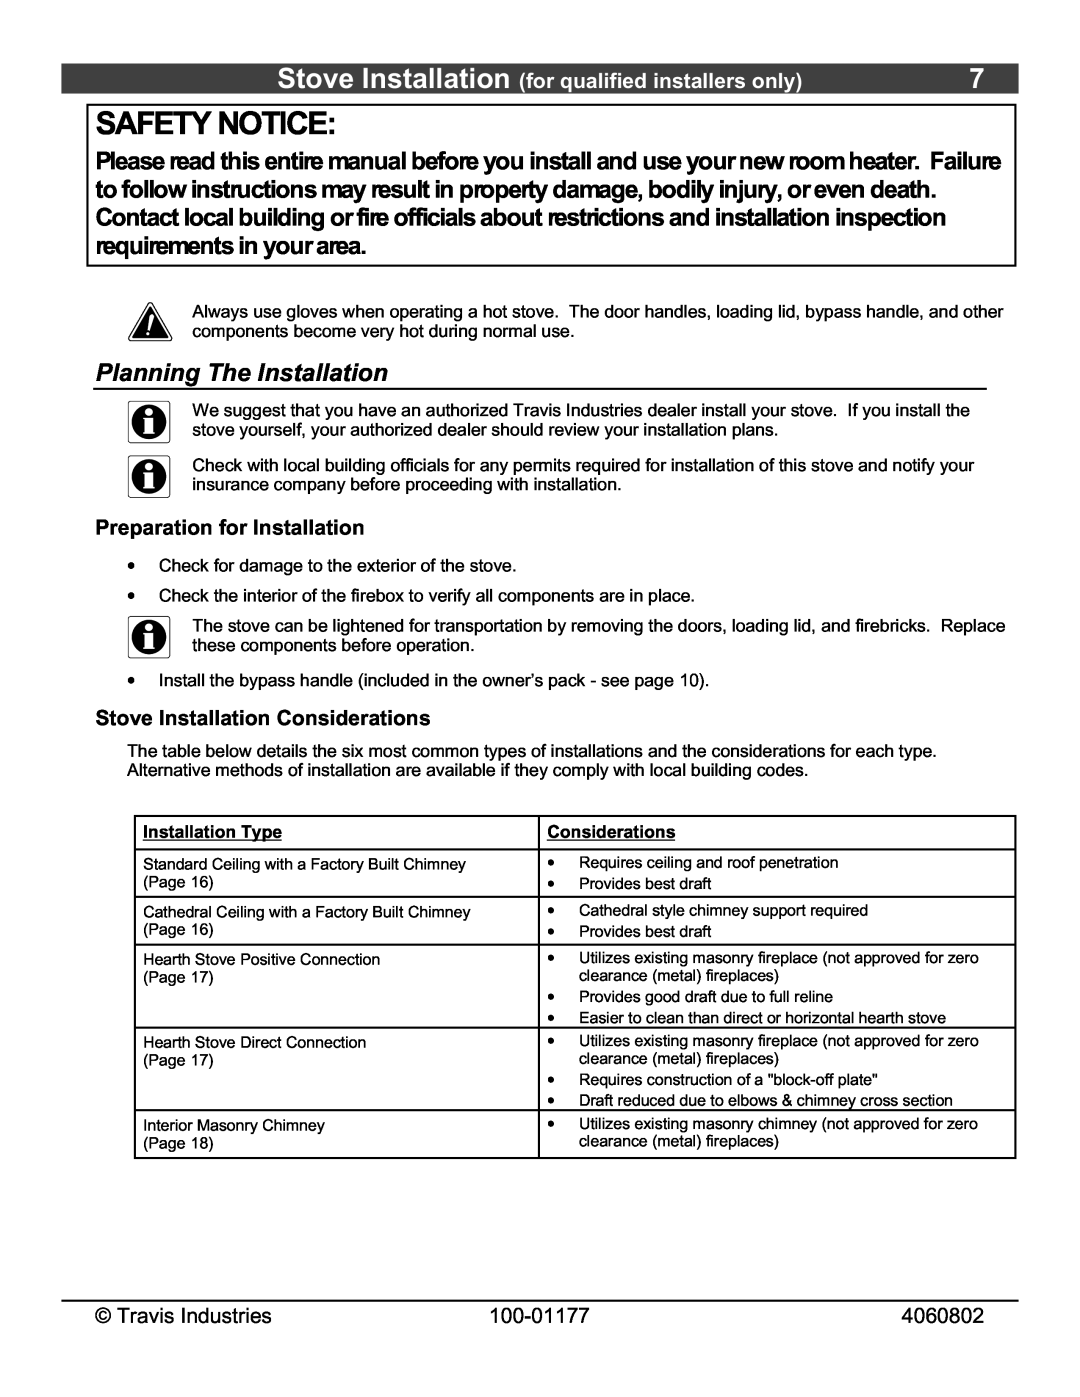 Lopi 028-S-75-2 Safety Notice, Planning The Installation, Stove Installation for qualified installers only, Considerations 